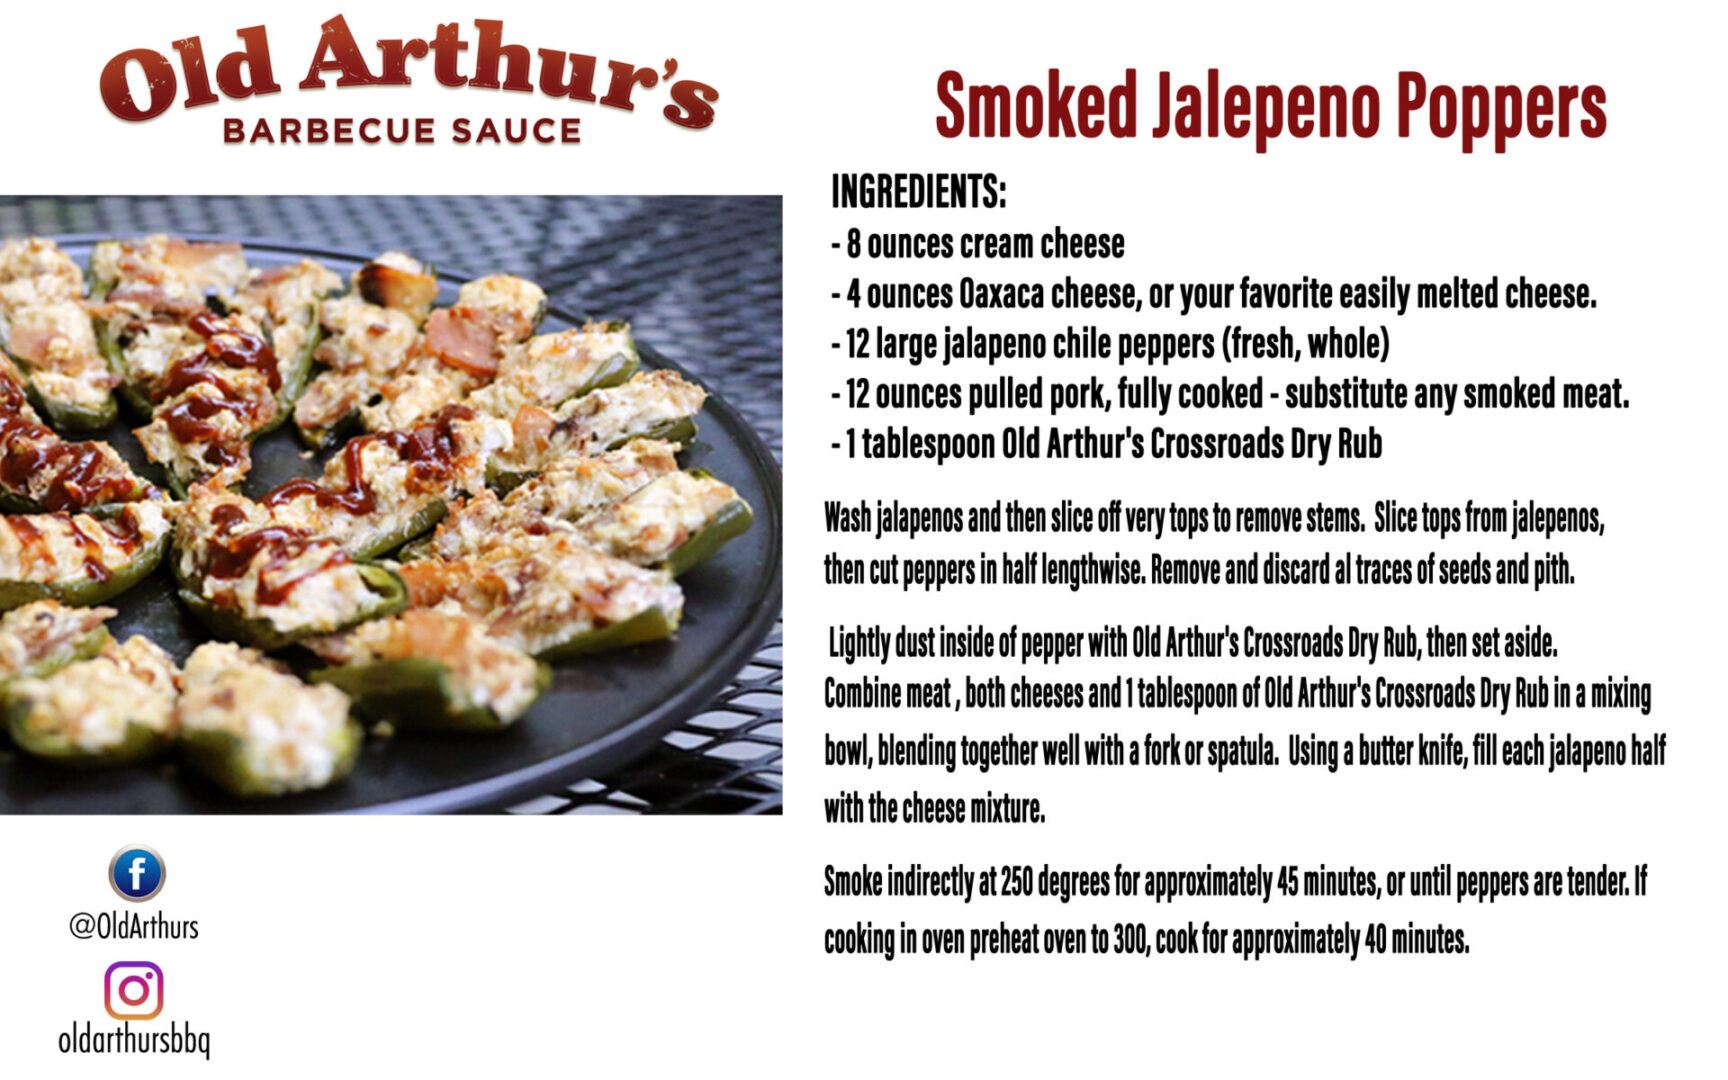 Smoked Jalepeno Poppers